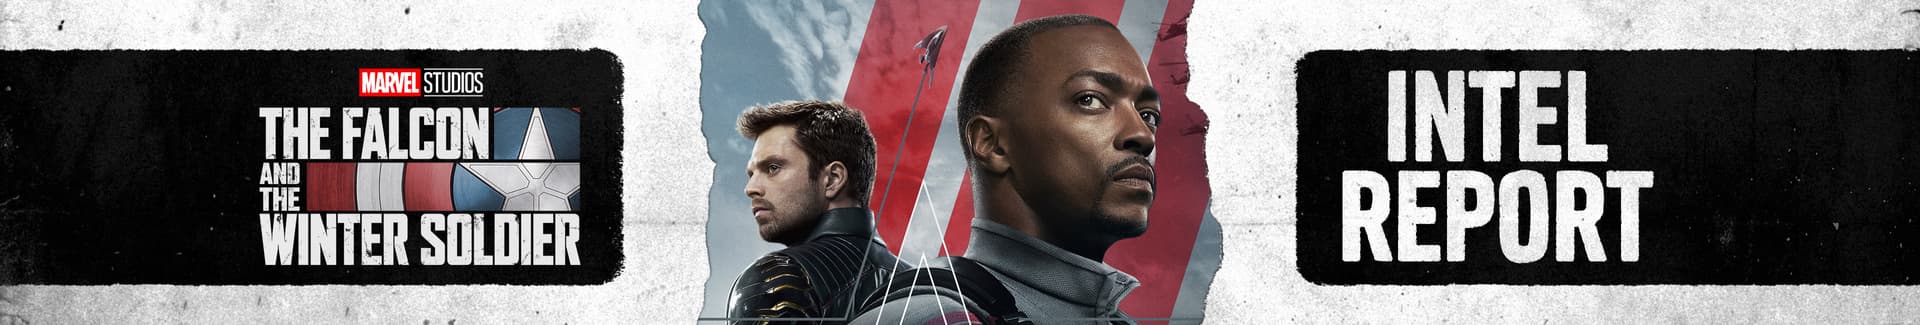 The Falcon and The Winter Soldier: Episode 6 Intel Report